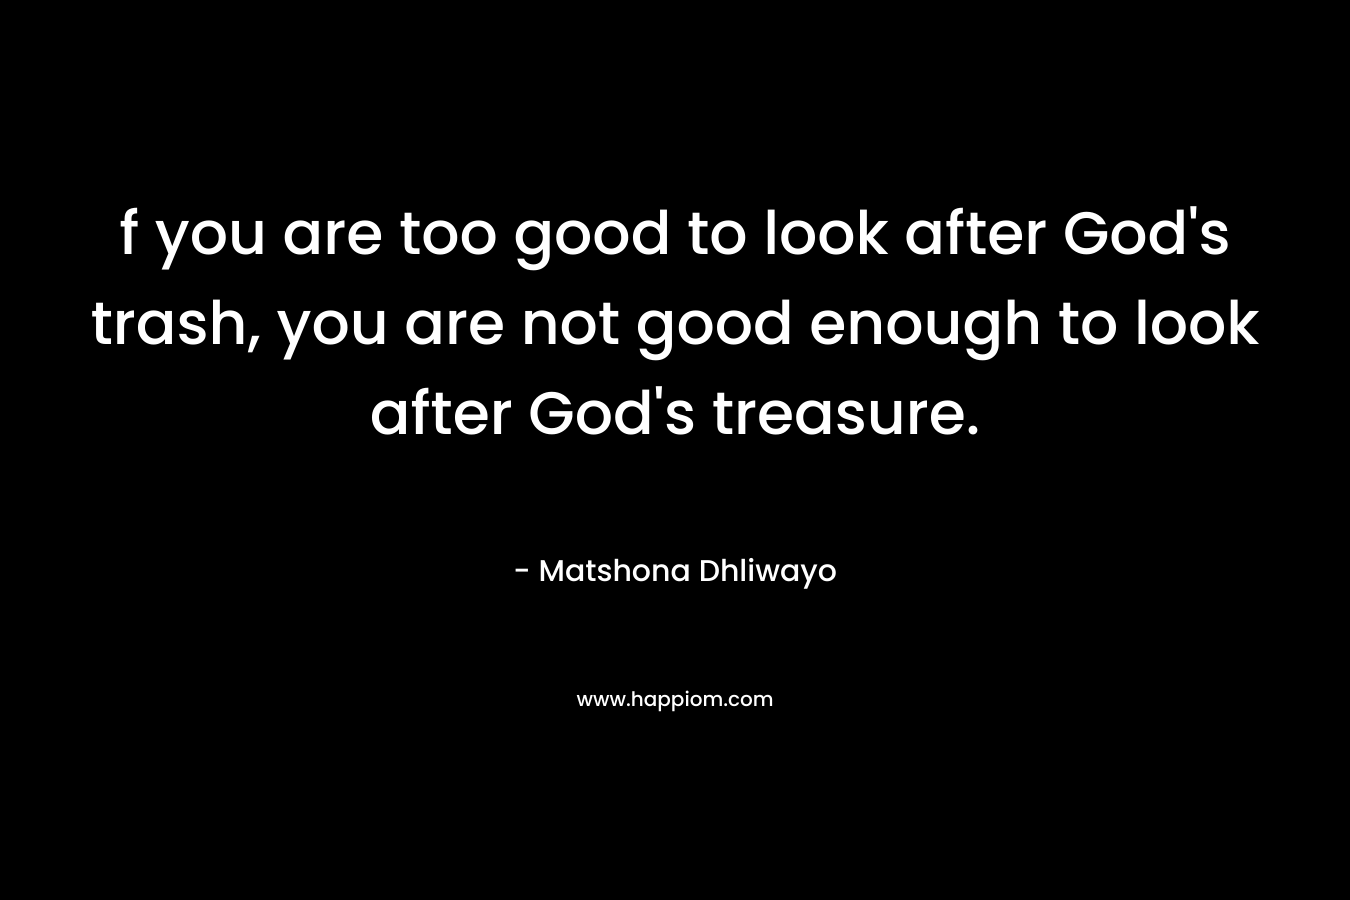 f you are too good to look after God’s trash, you are not good enough to look after God’s treasure. – Matshona Dhliwayo